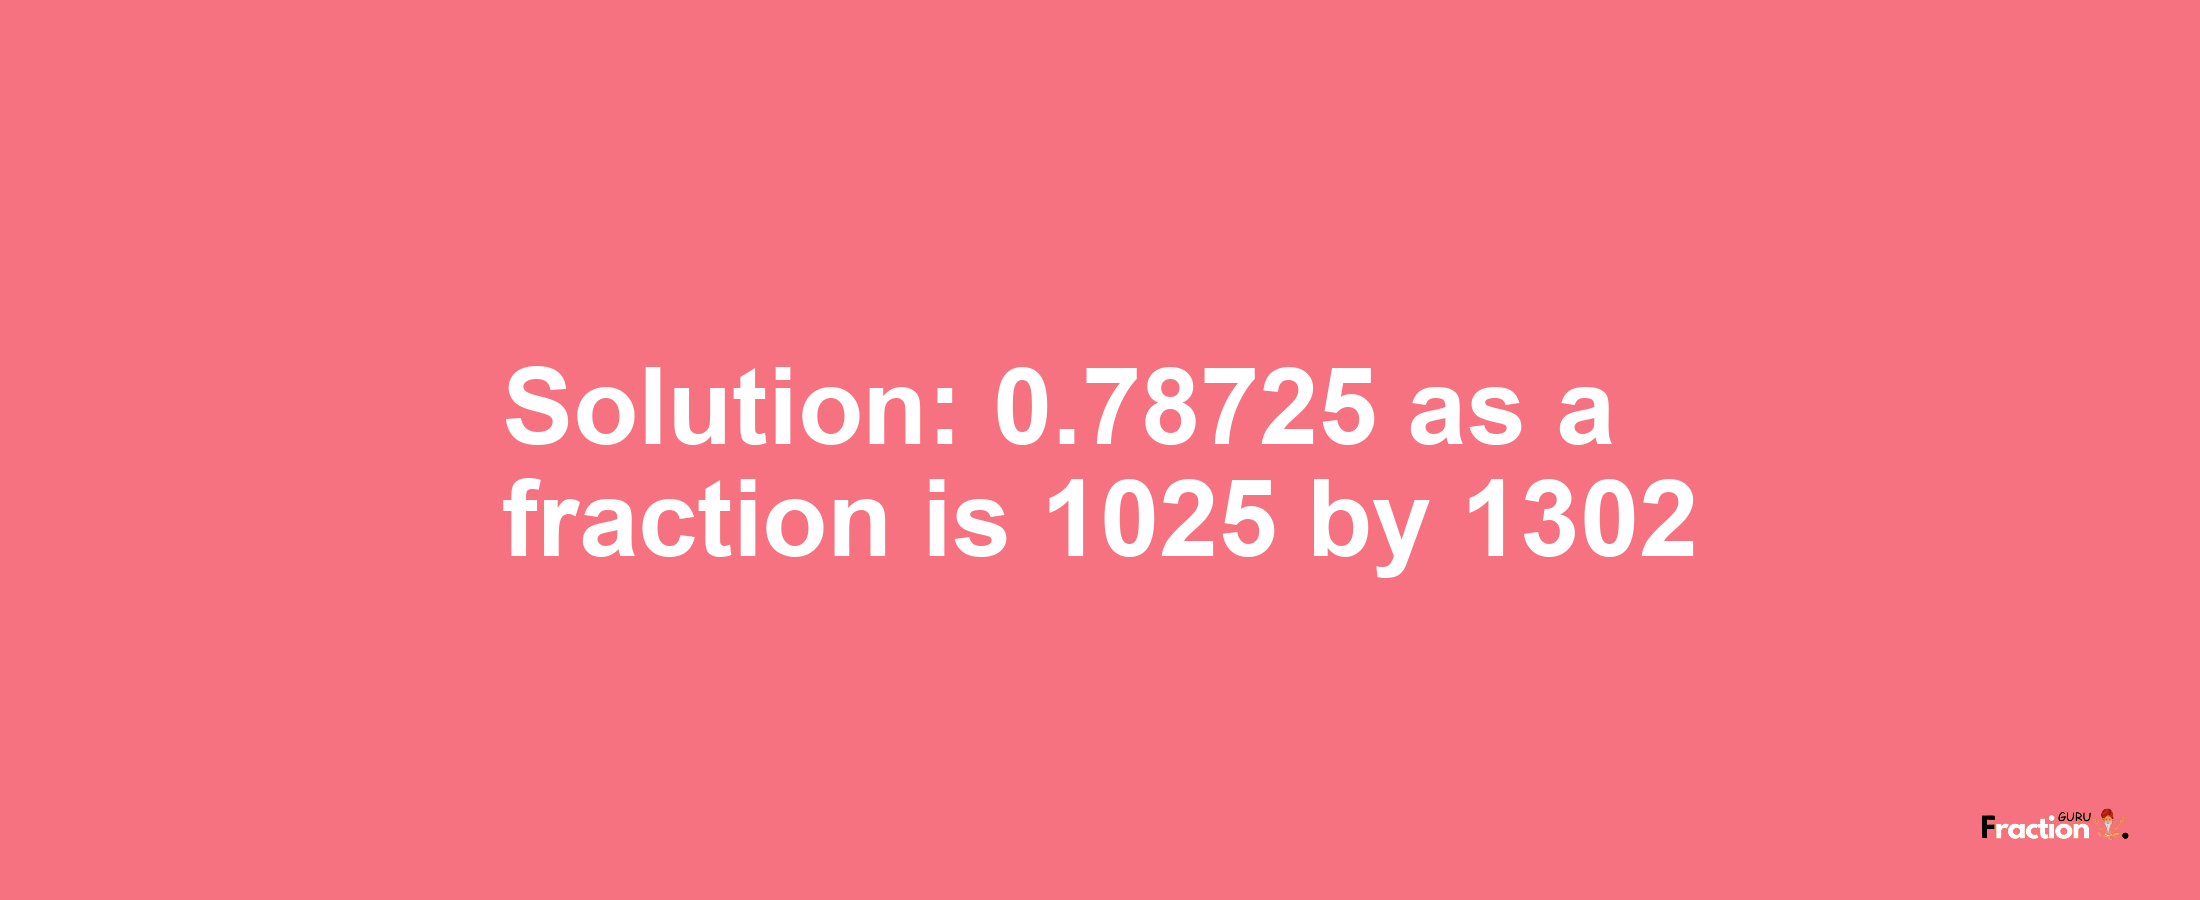 Solution:0.78725 as a fraction is 1025/1302